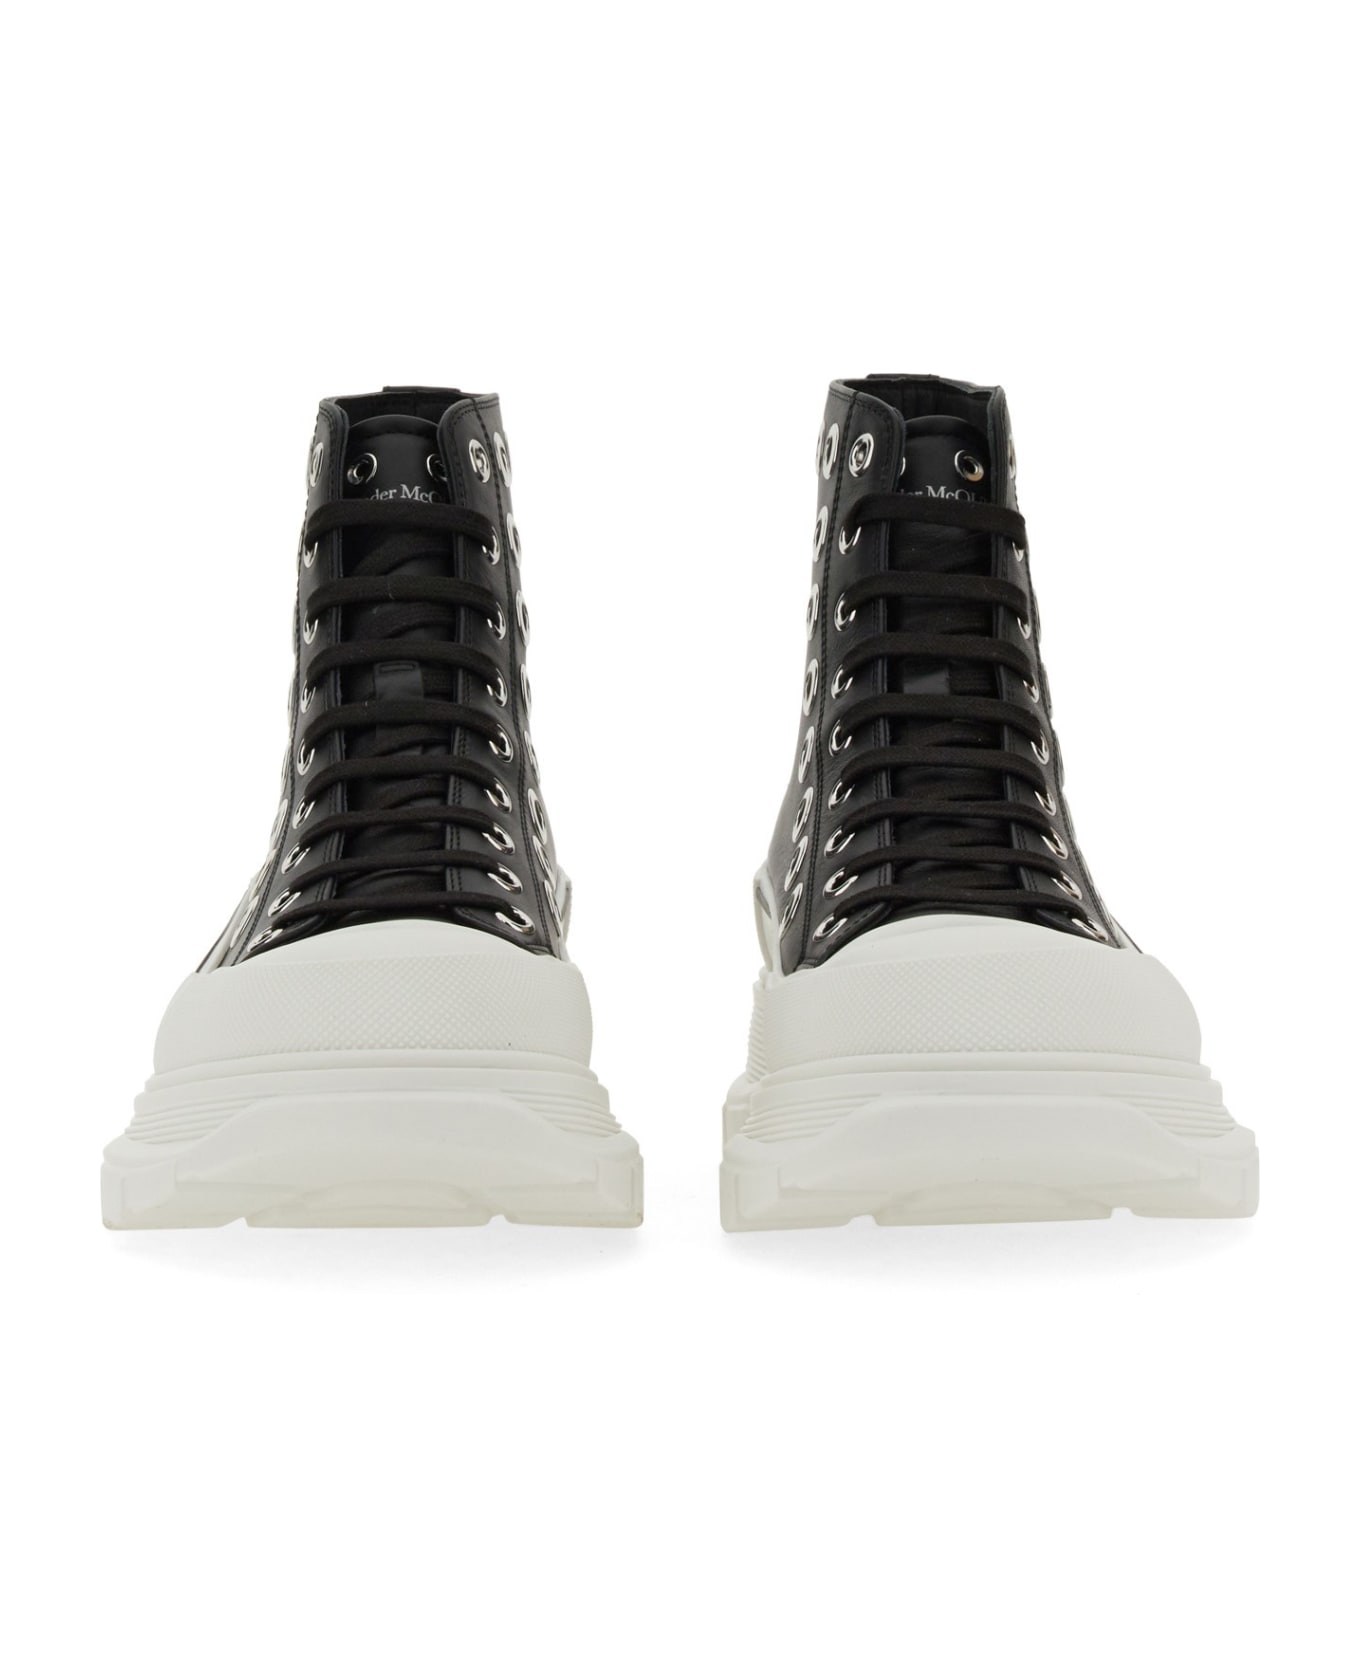 Alexander McQueen Joey Sneaker With Eyelets - Blk Of Wh Blk Sil